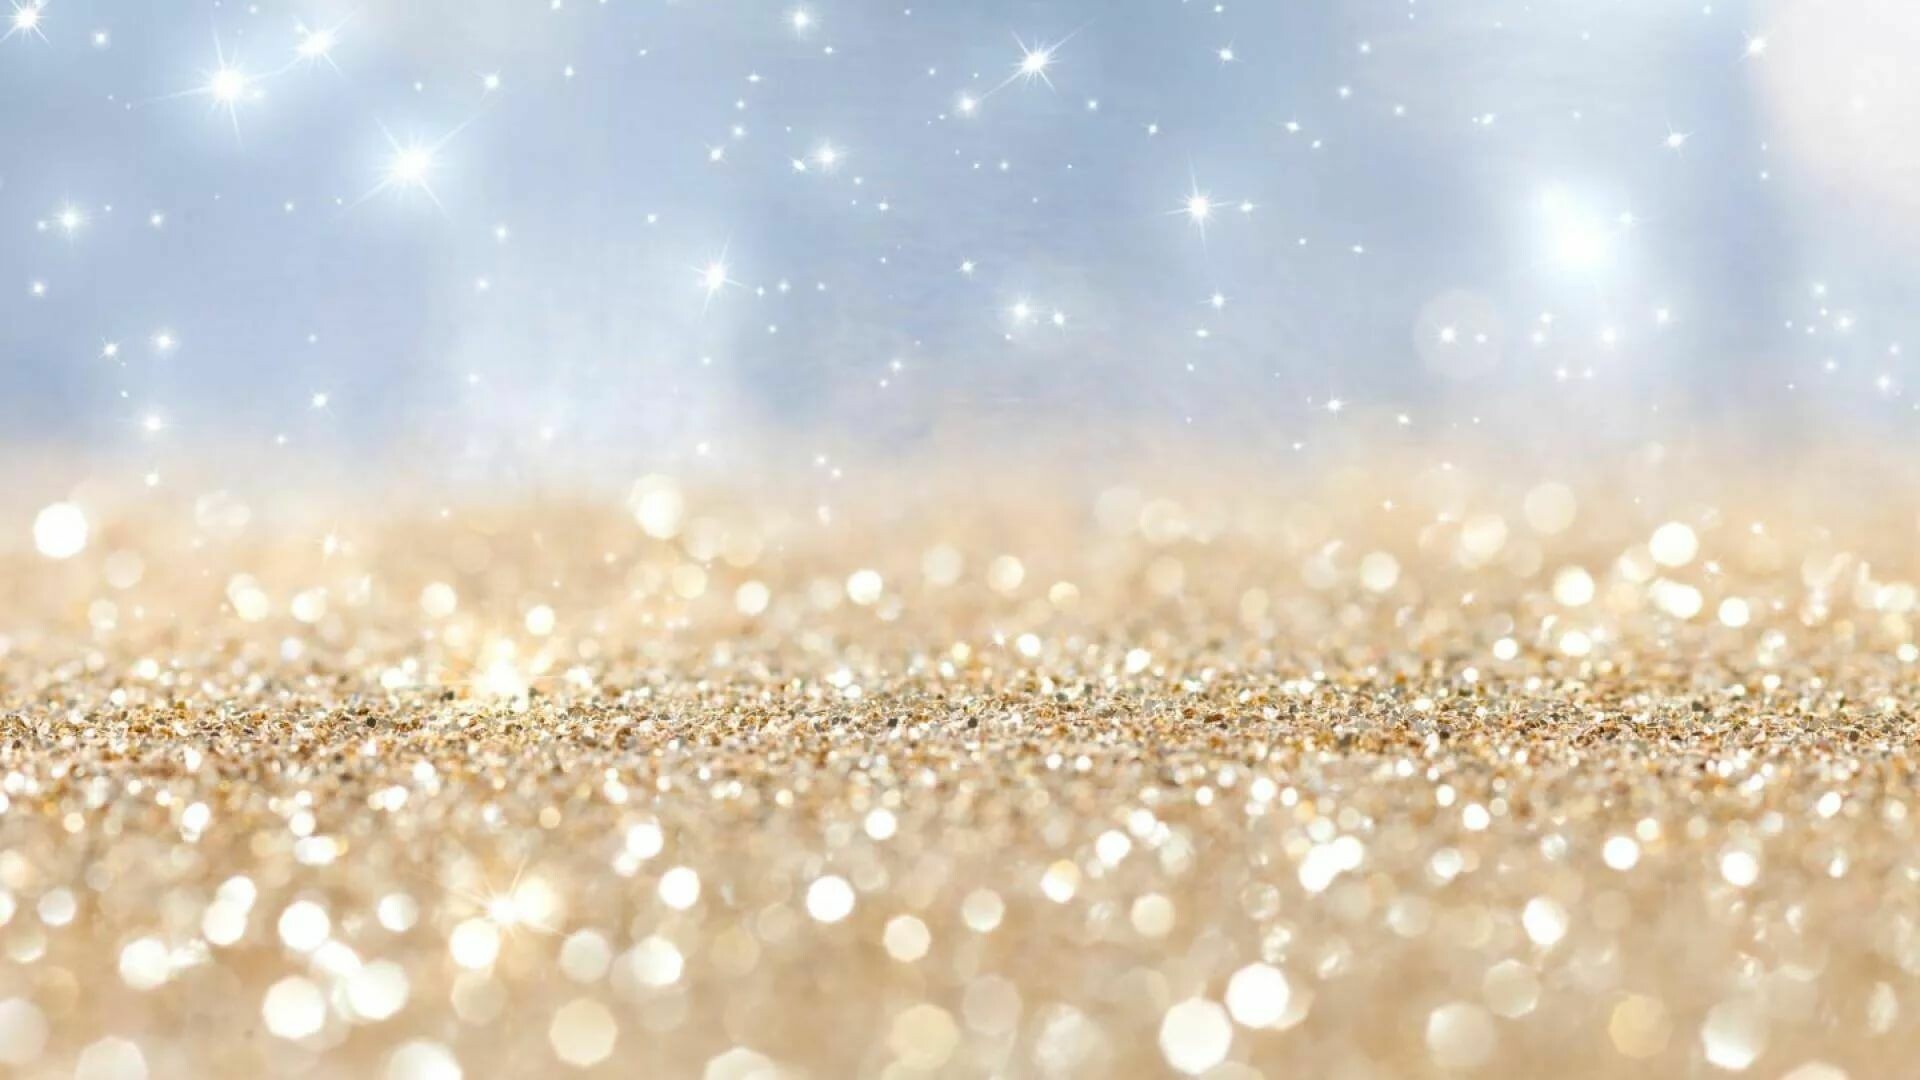 Sparkle: Glitter, Used by culinary artists, Glowing. 1920x1080 Full HD Background.